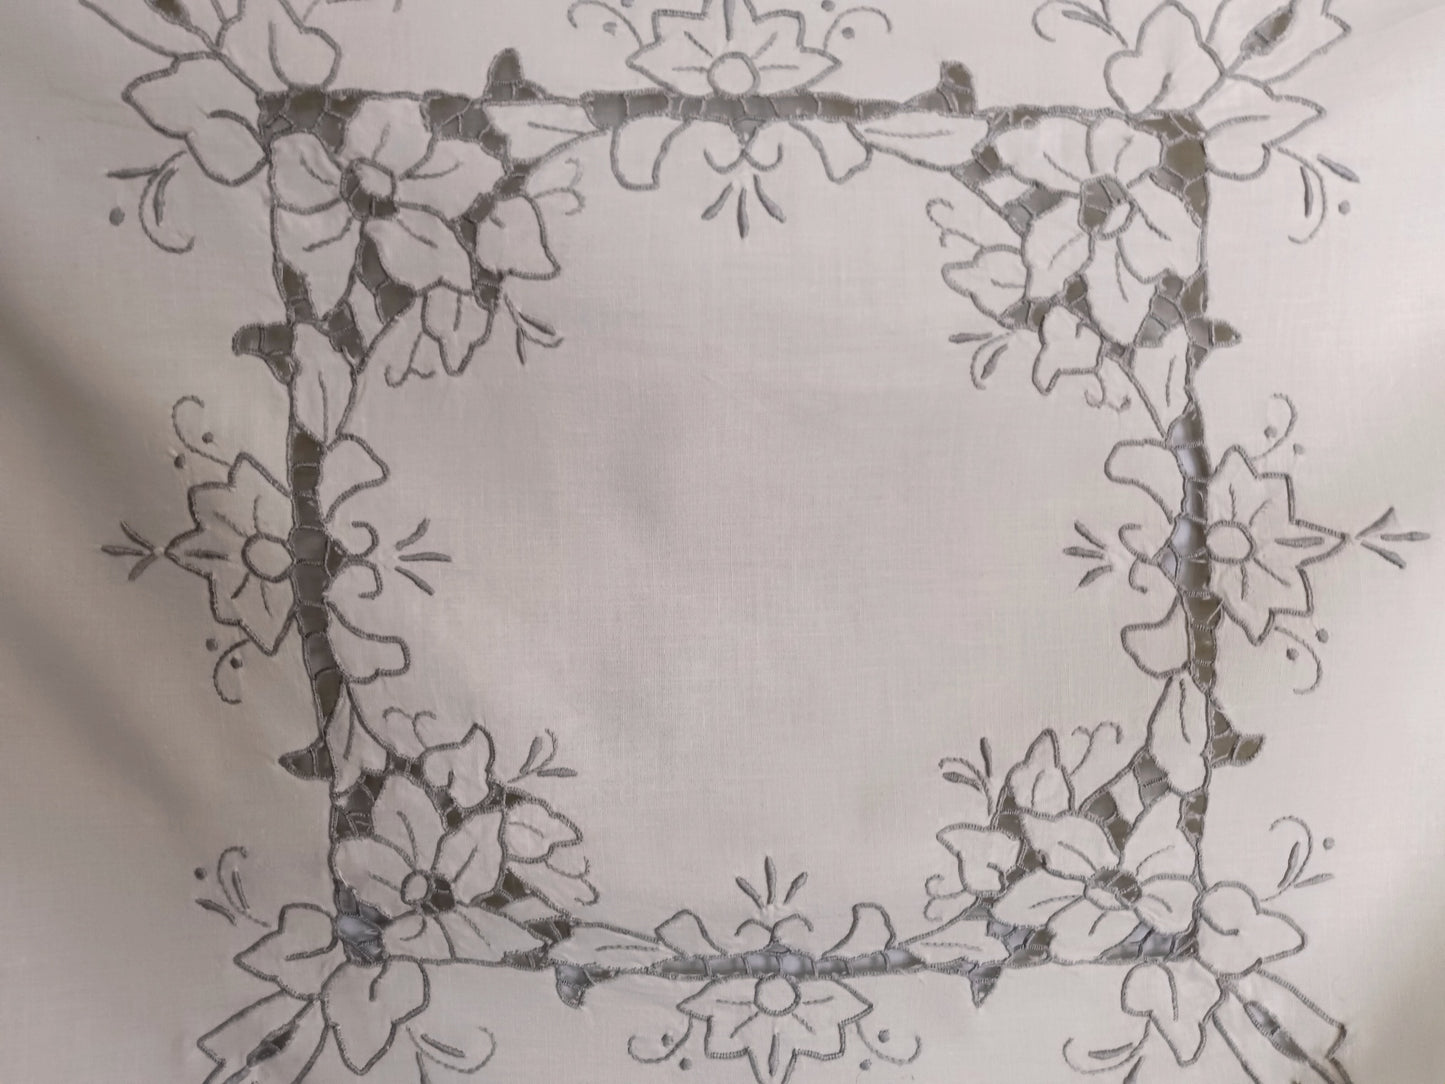 Vintage Ivory Cotton Linen Small Tablecloth Embroidered Floral Cut Work Design Machine Stitching Ecru Color Thread Large Doily 41” W x 41” L